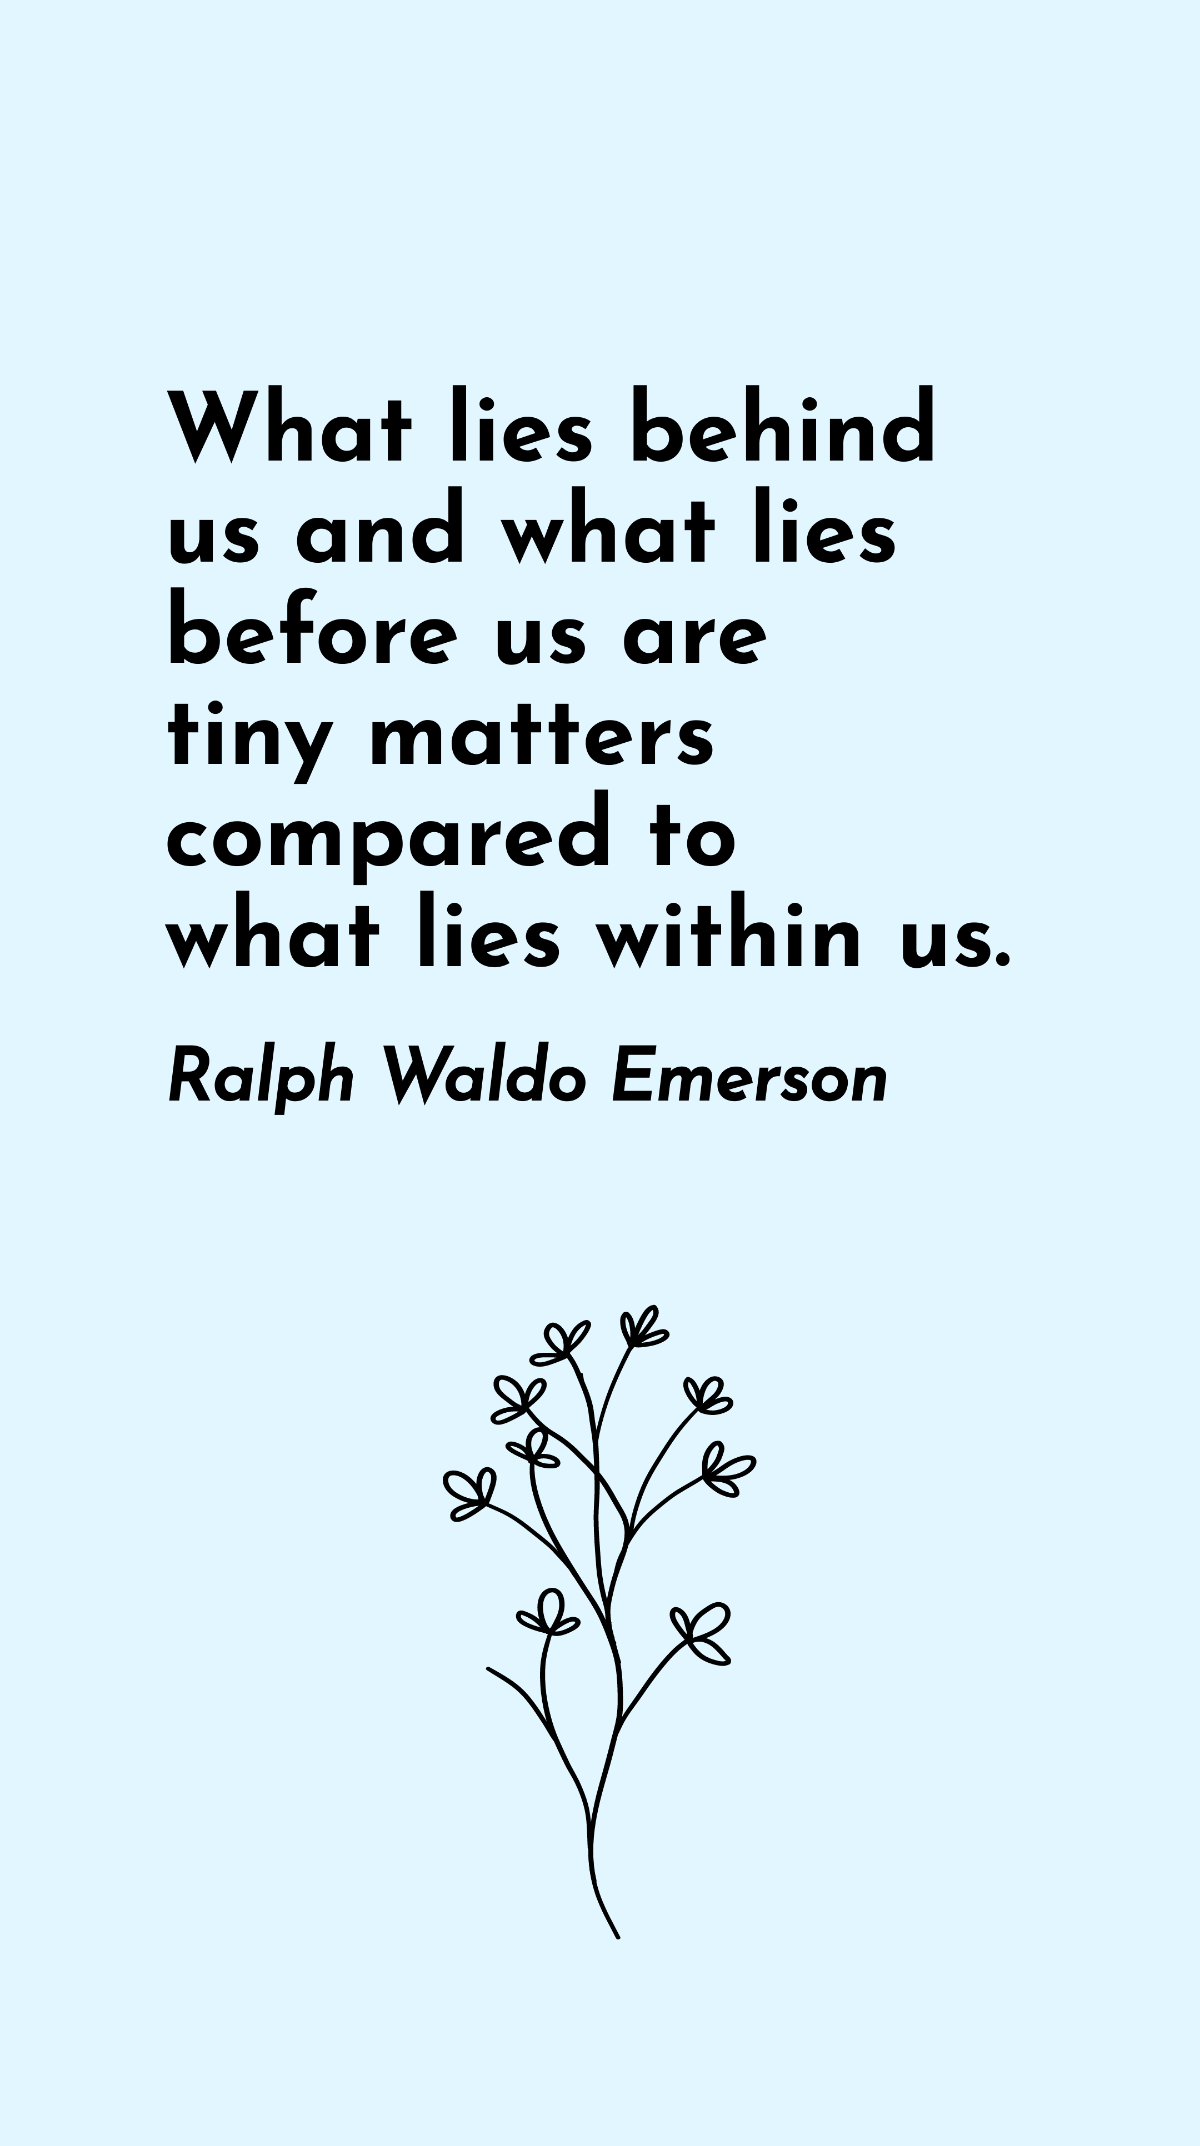 Ralph Waldo Emerson - What lies behind us and what lies before us are tiny matters compared to what lies within us. Template